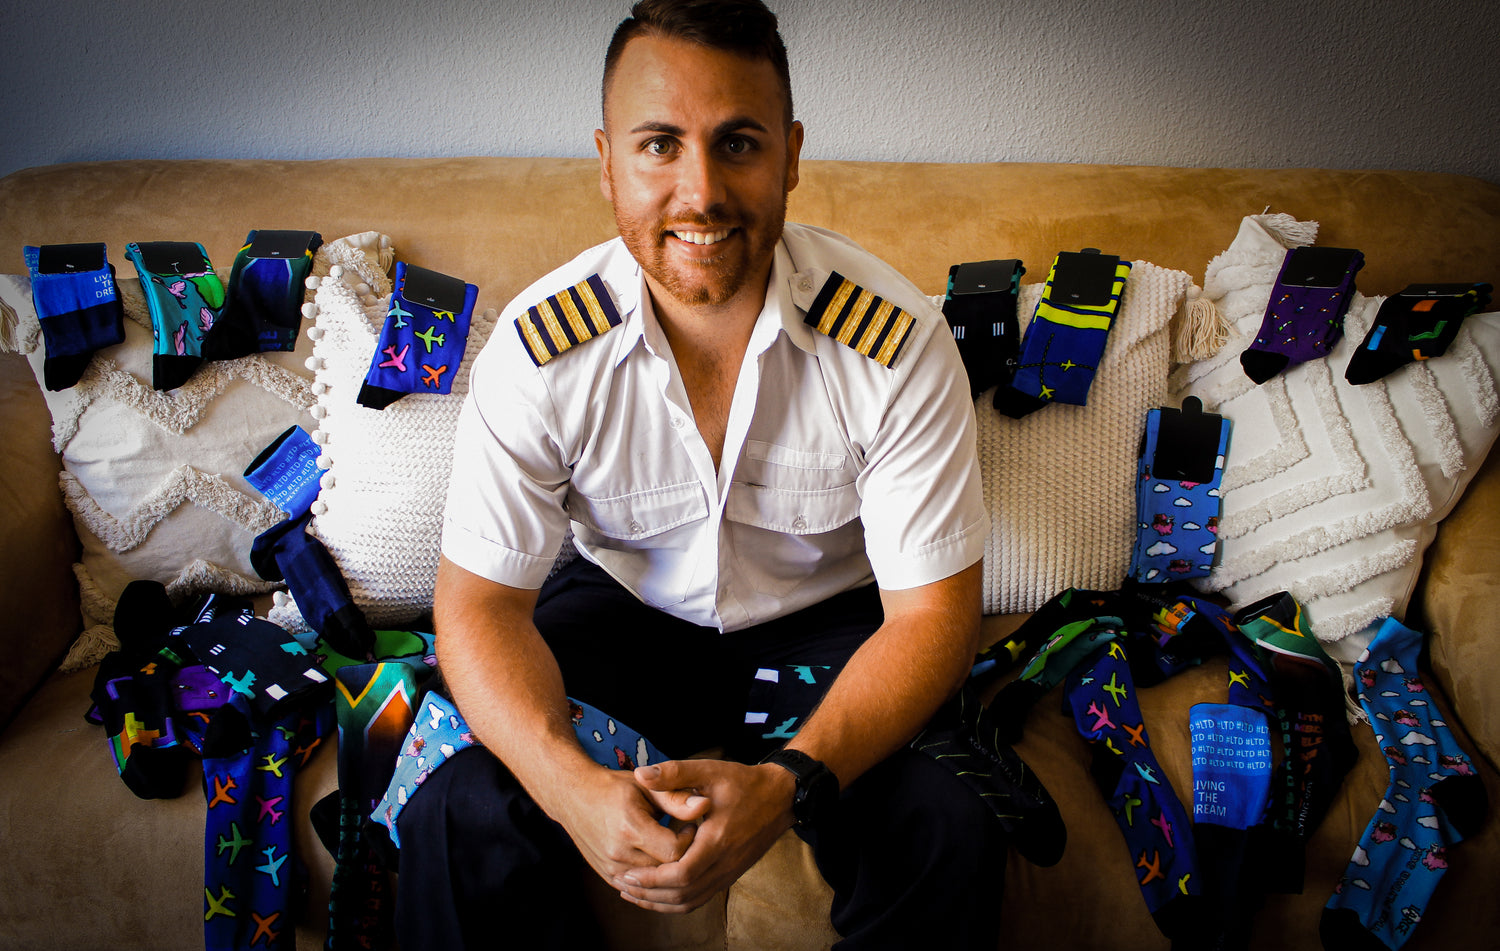 A pilot with pairs of Flying socks sitting on a couch